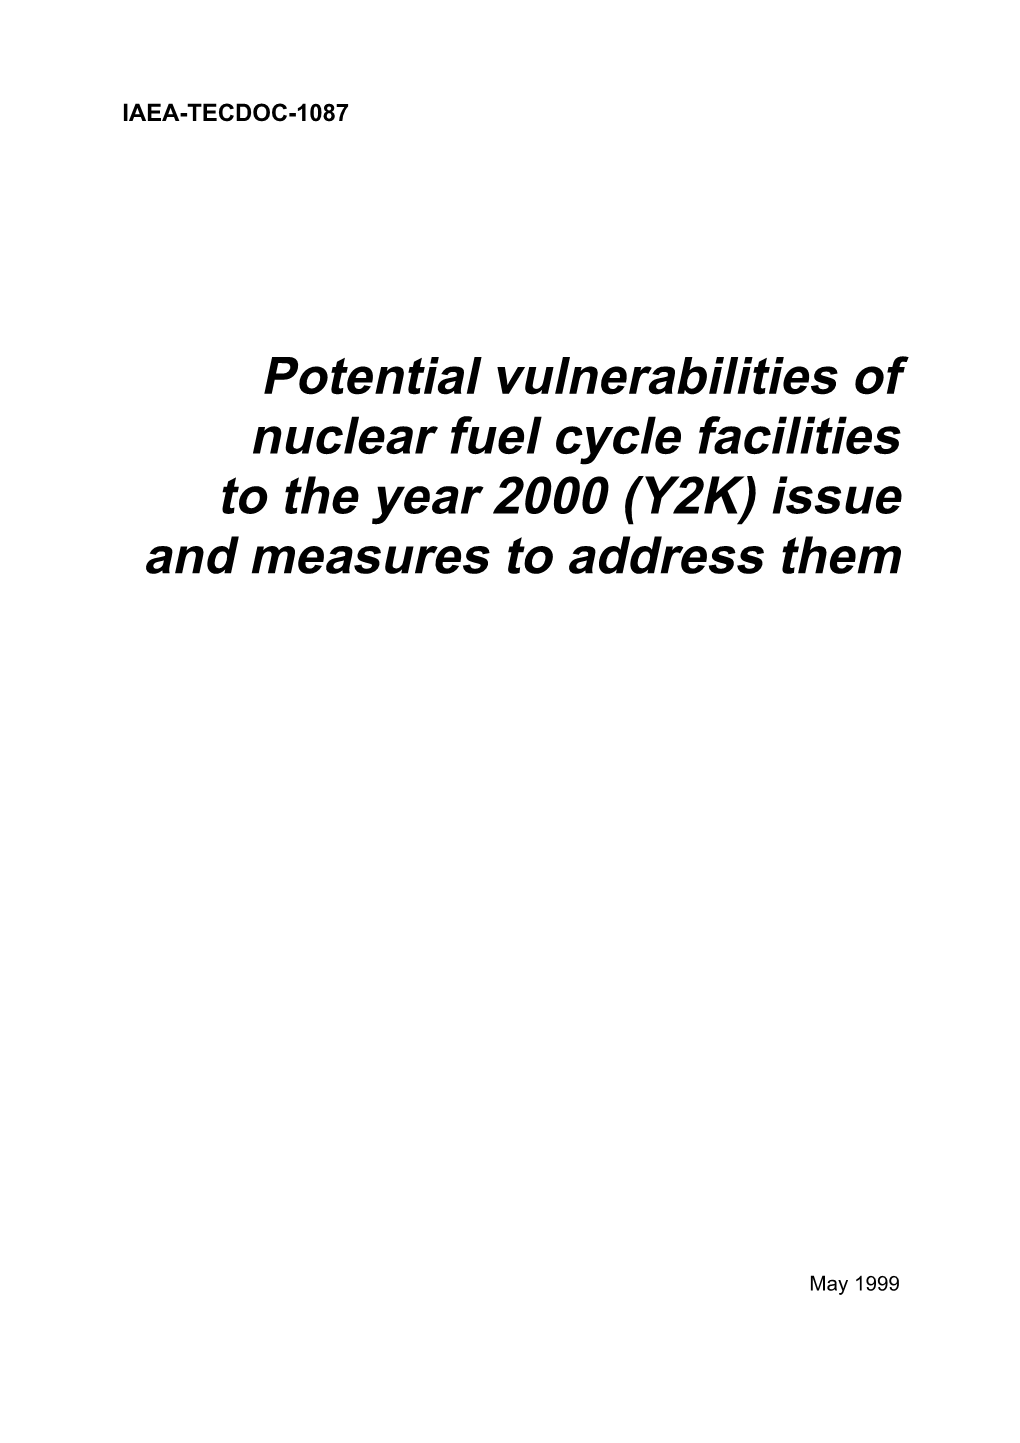 Potential Vulnerabilities of Nuclear Fuel Cycle Facilities to the Year 2000 (Y2K) Issue and Measures to Address Them